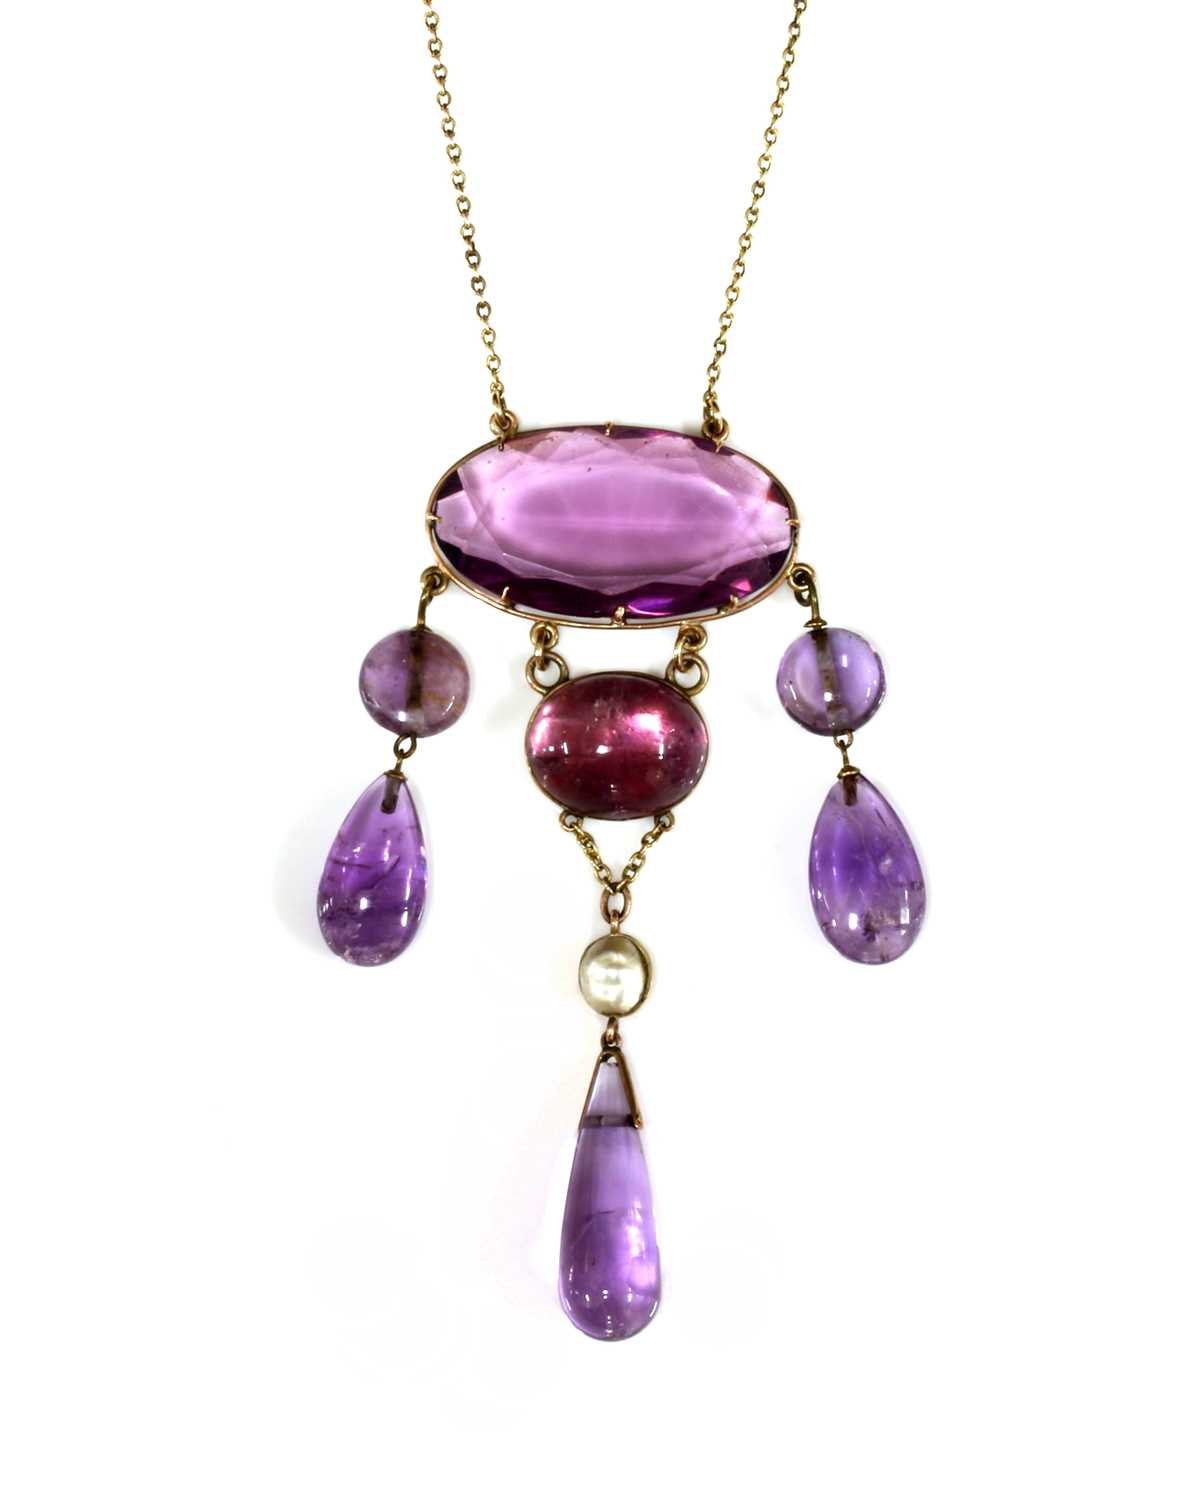 Lot 78 - An Edwardian amethyst, paste and blister pearl necklace